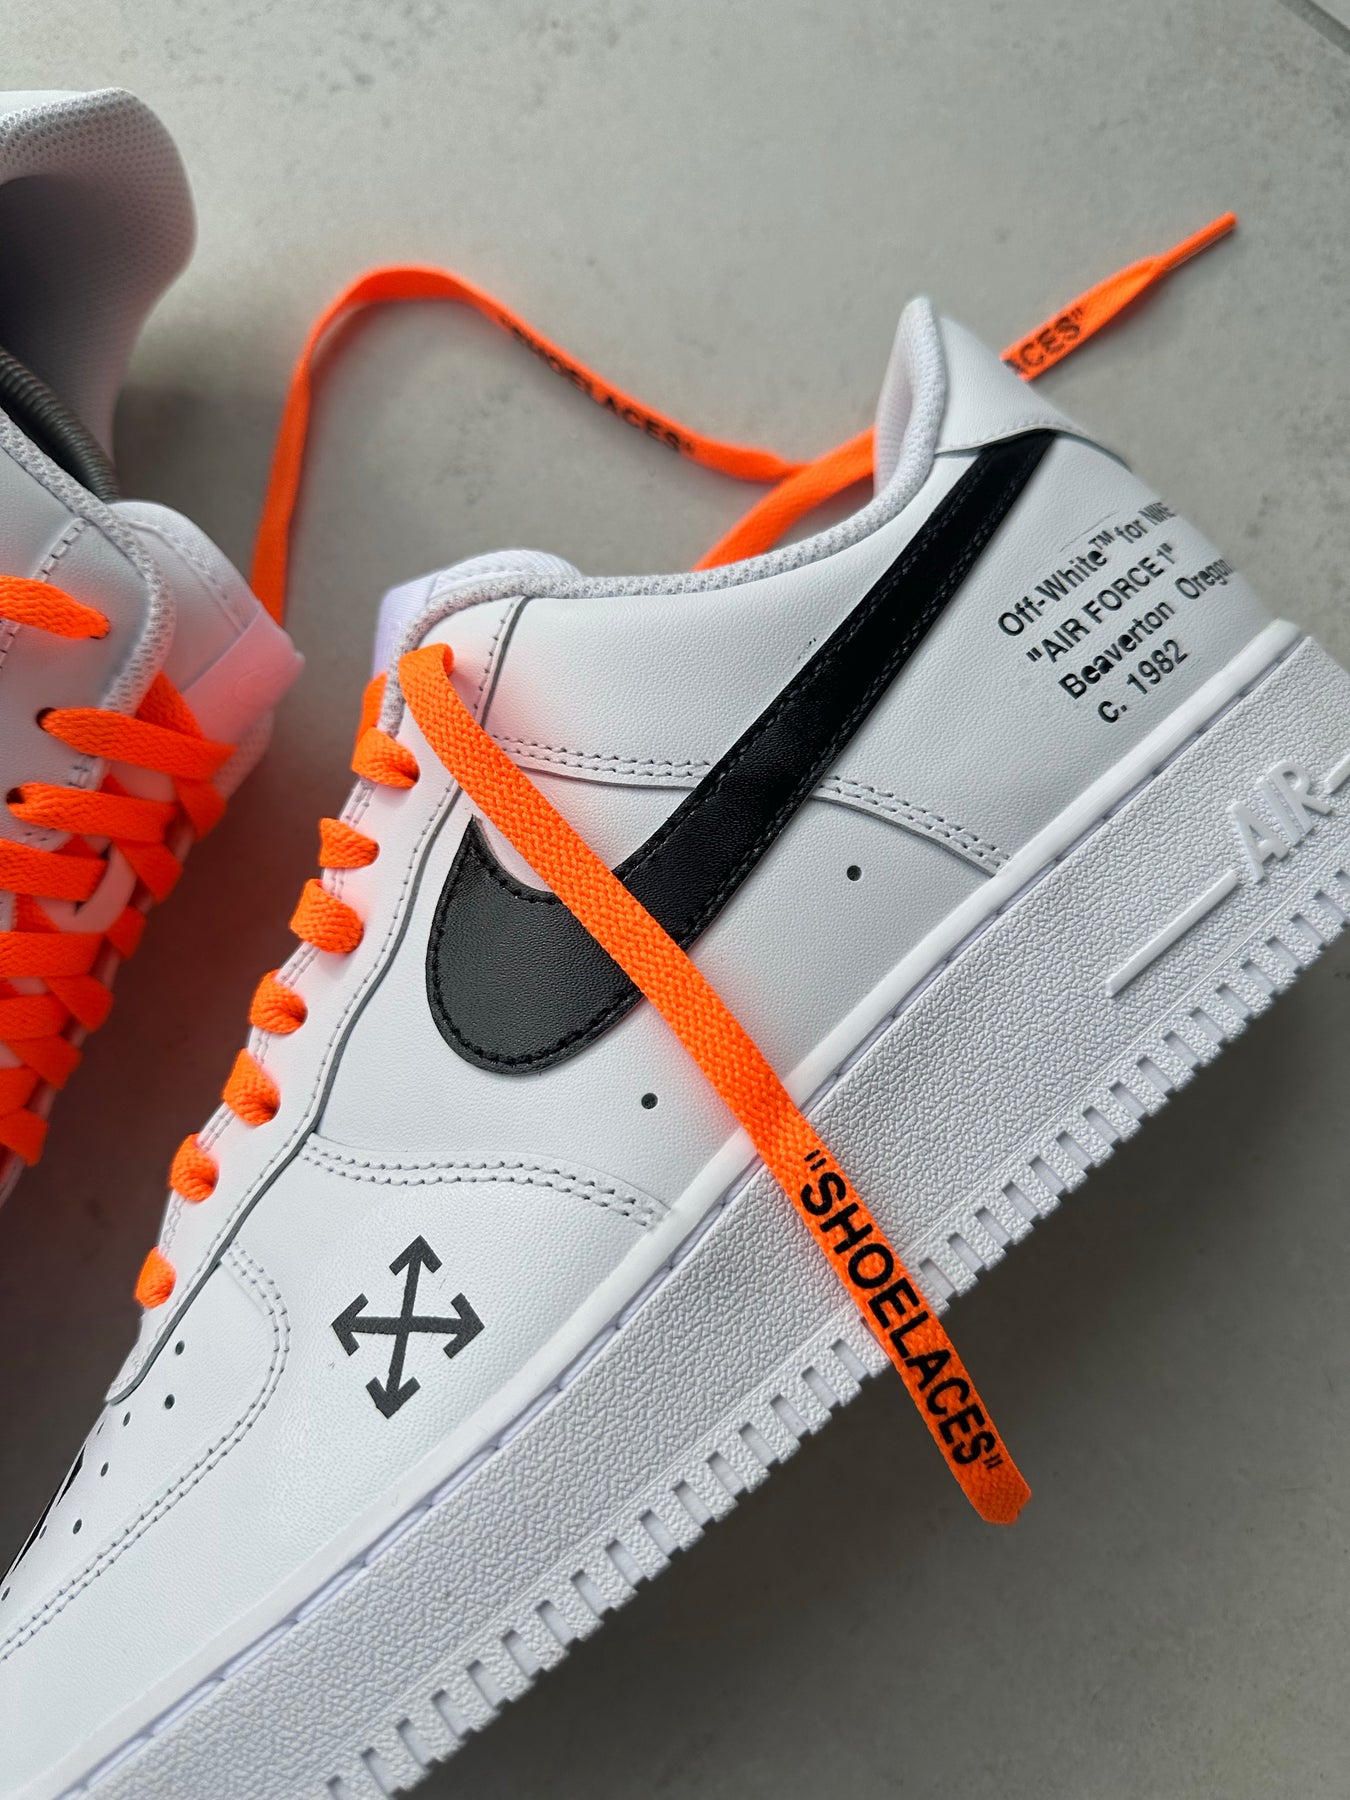 Holla Customz on X: Custom painted OFF - WHITE Air Force 1's